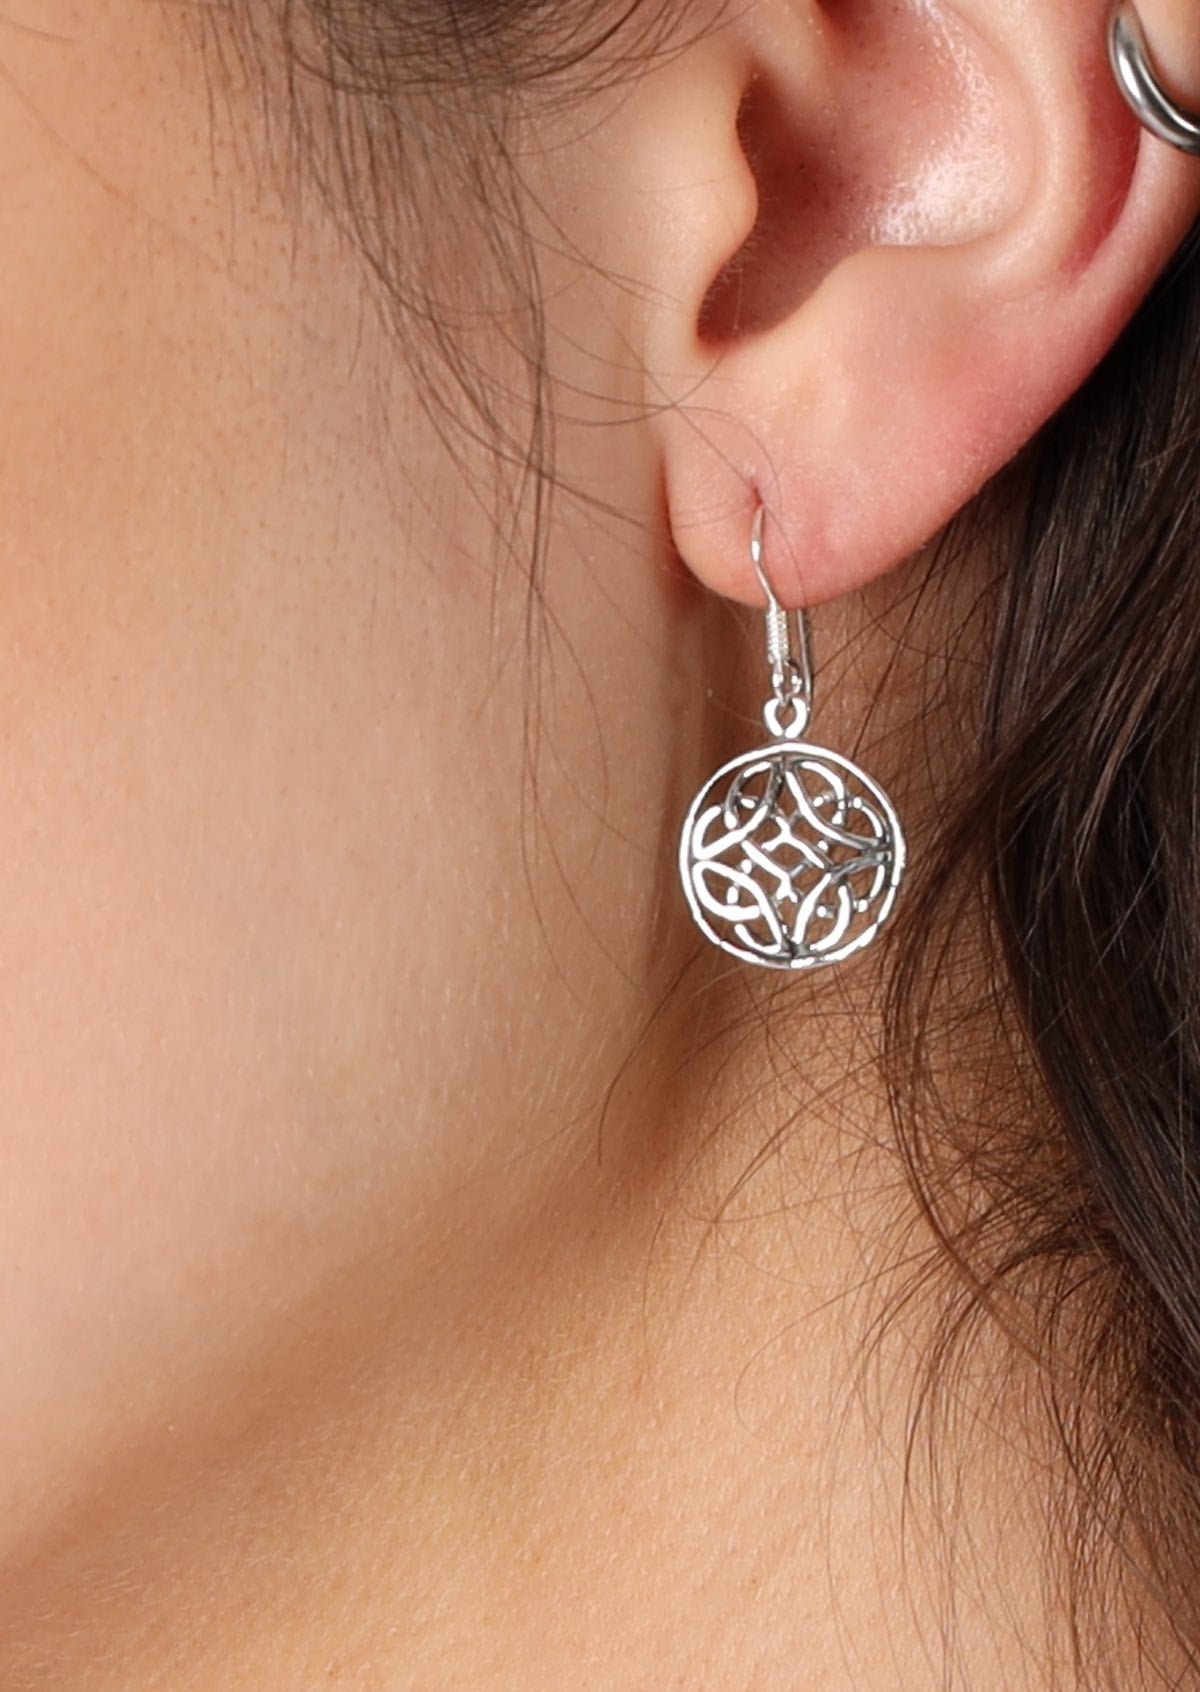 14mm diameter disc with Celtic knot silver hook earrings